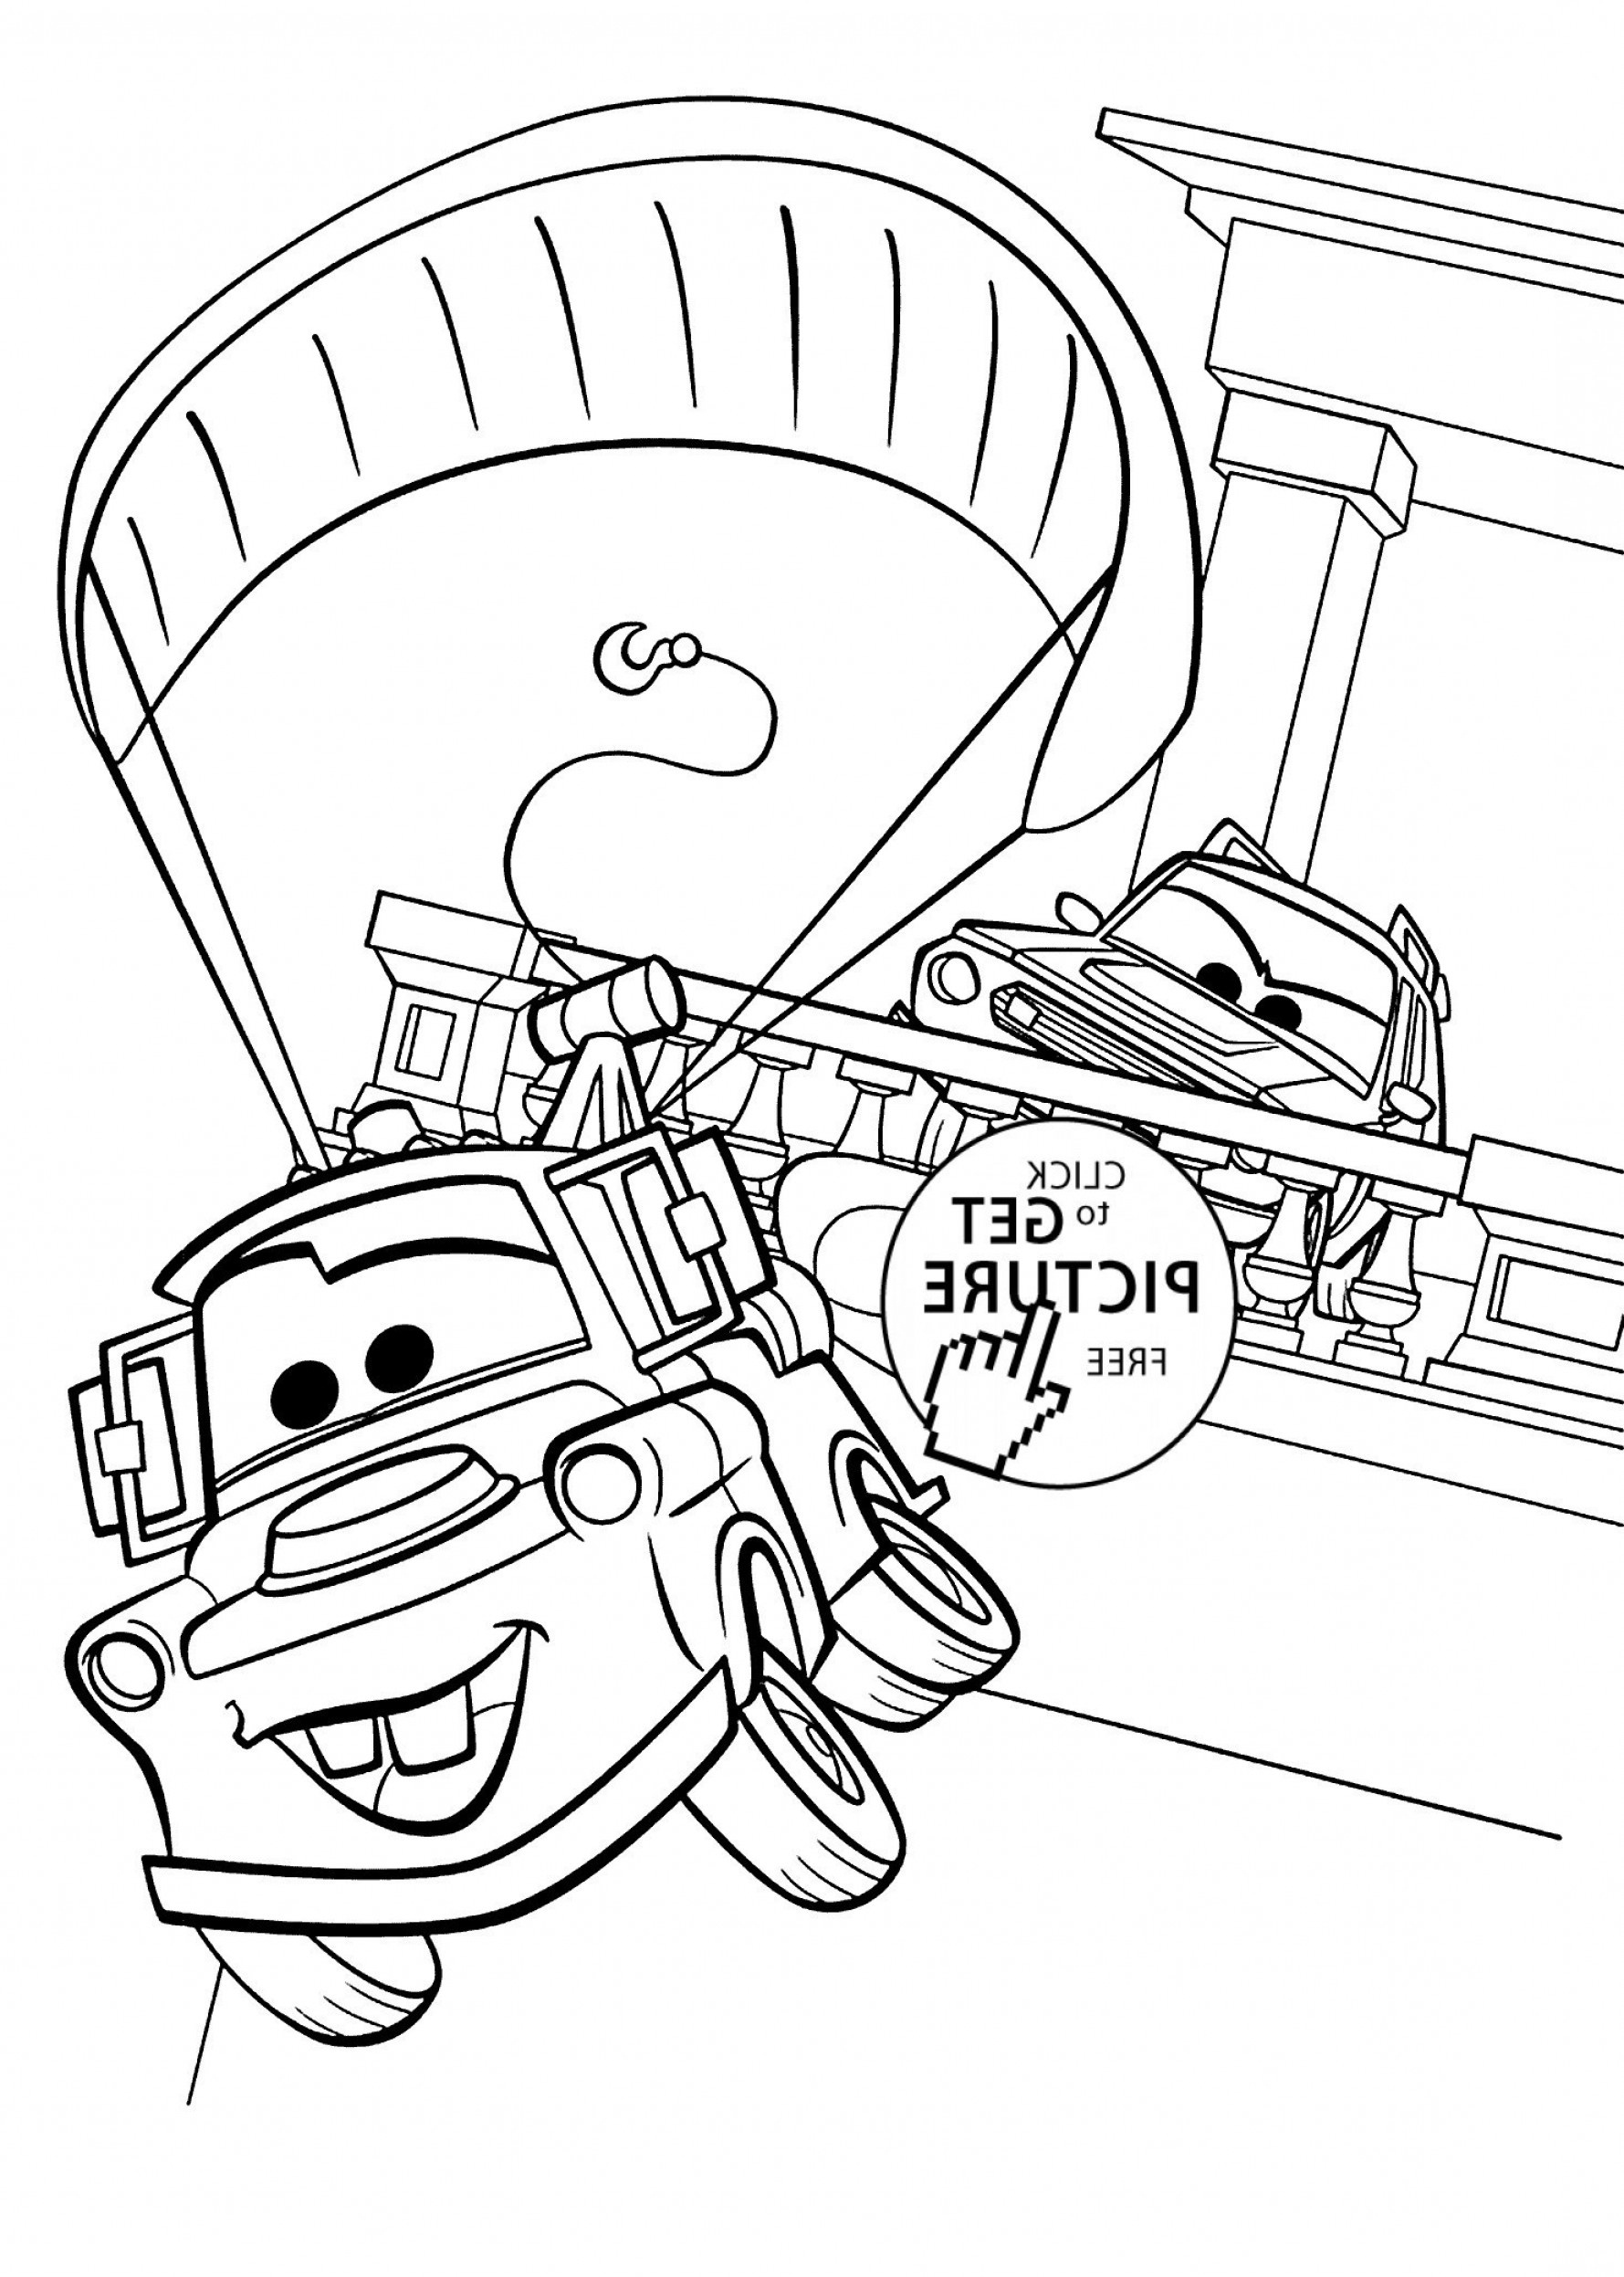 Coloring Ideas : Free Printable Disney Coloring Pages Cars Download - Free Printable Disney Coloring Pages